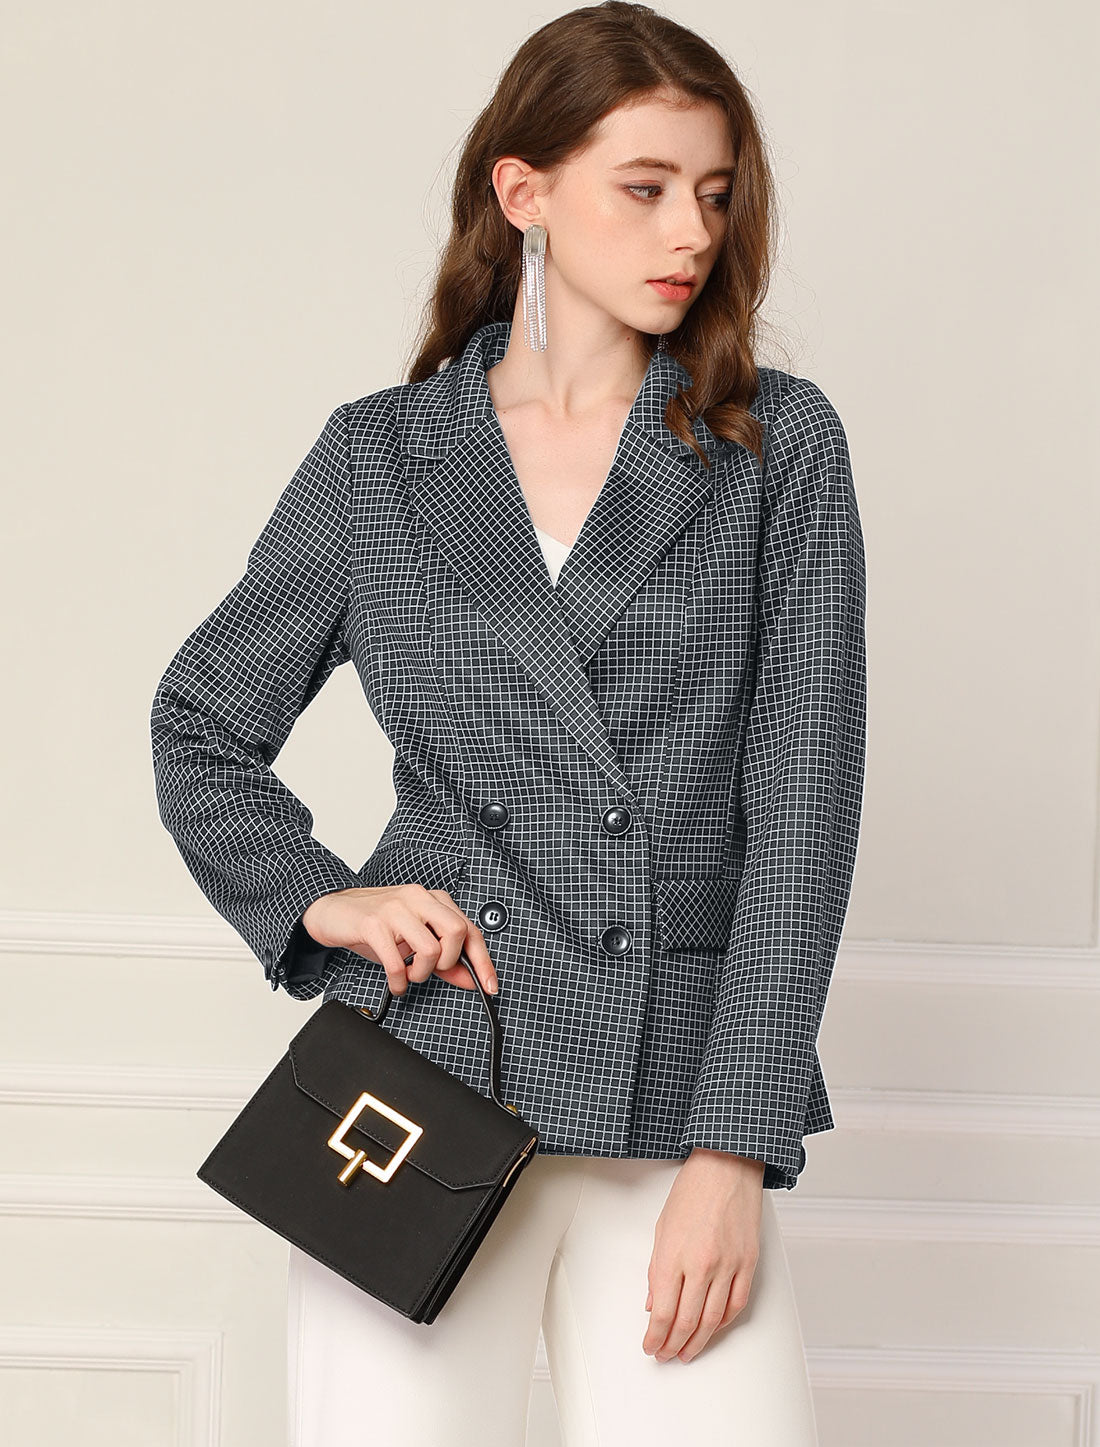 Allegra K Plaid Gingham Double Breasted Open Front Formal Blazers Jackets